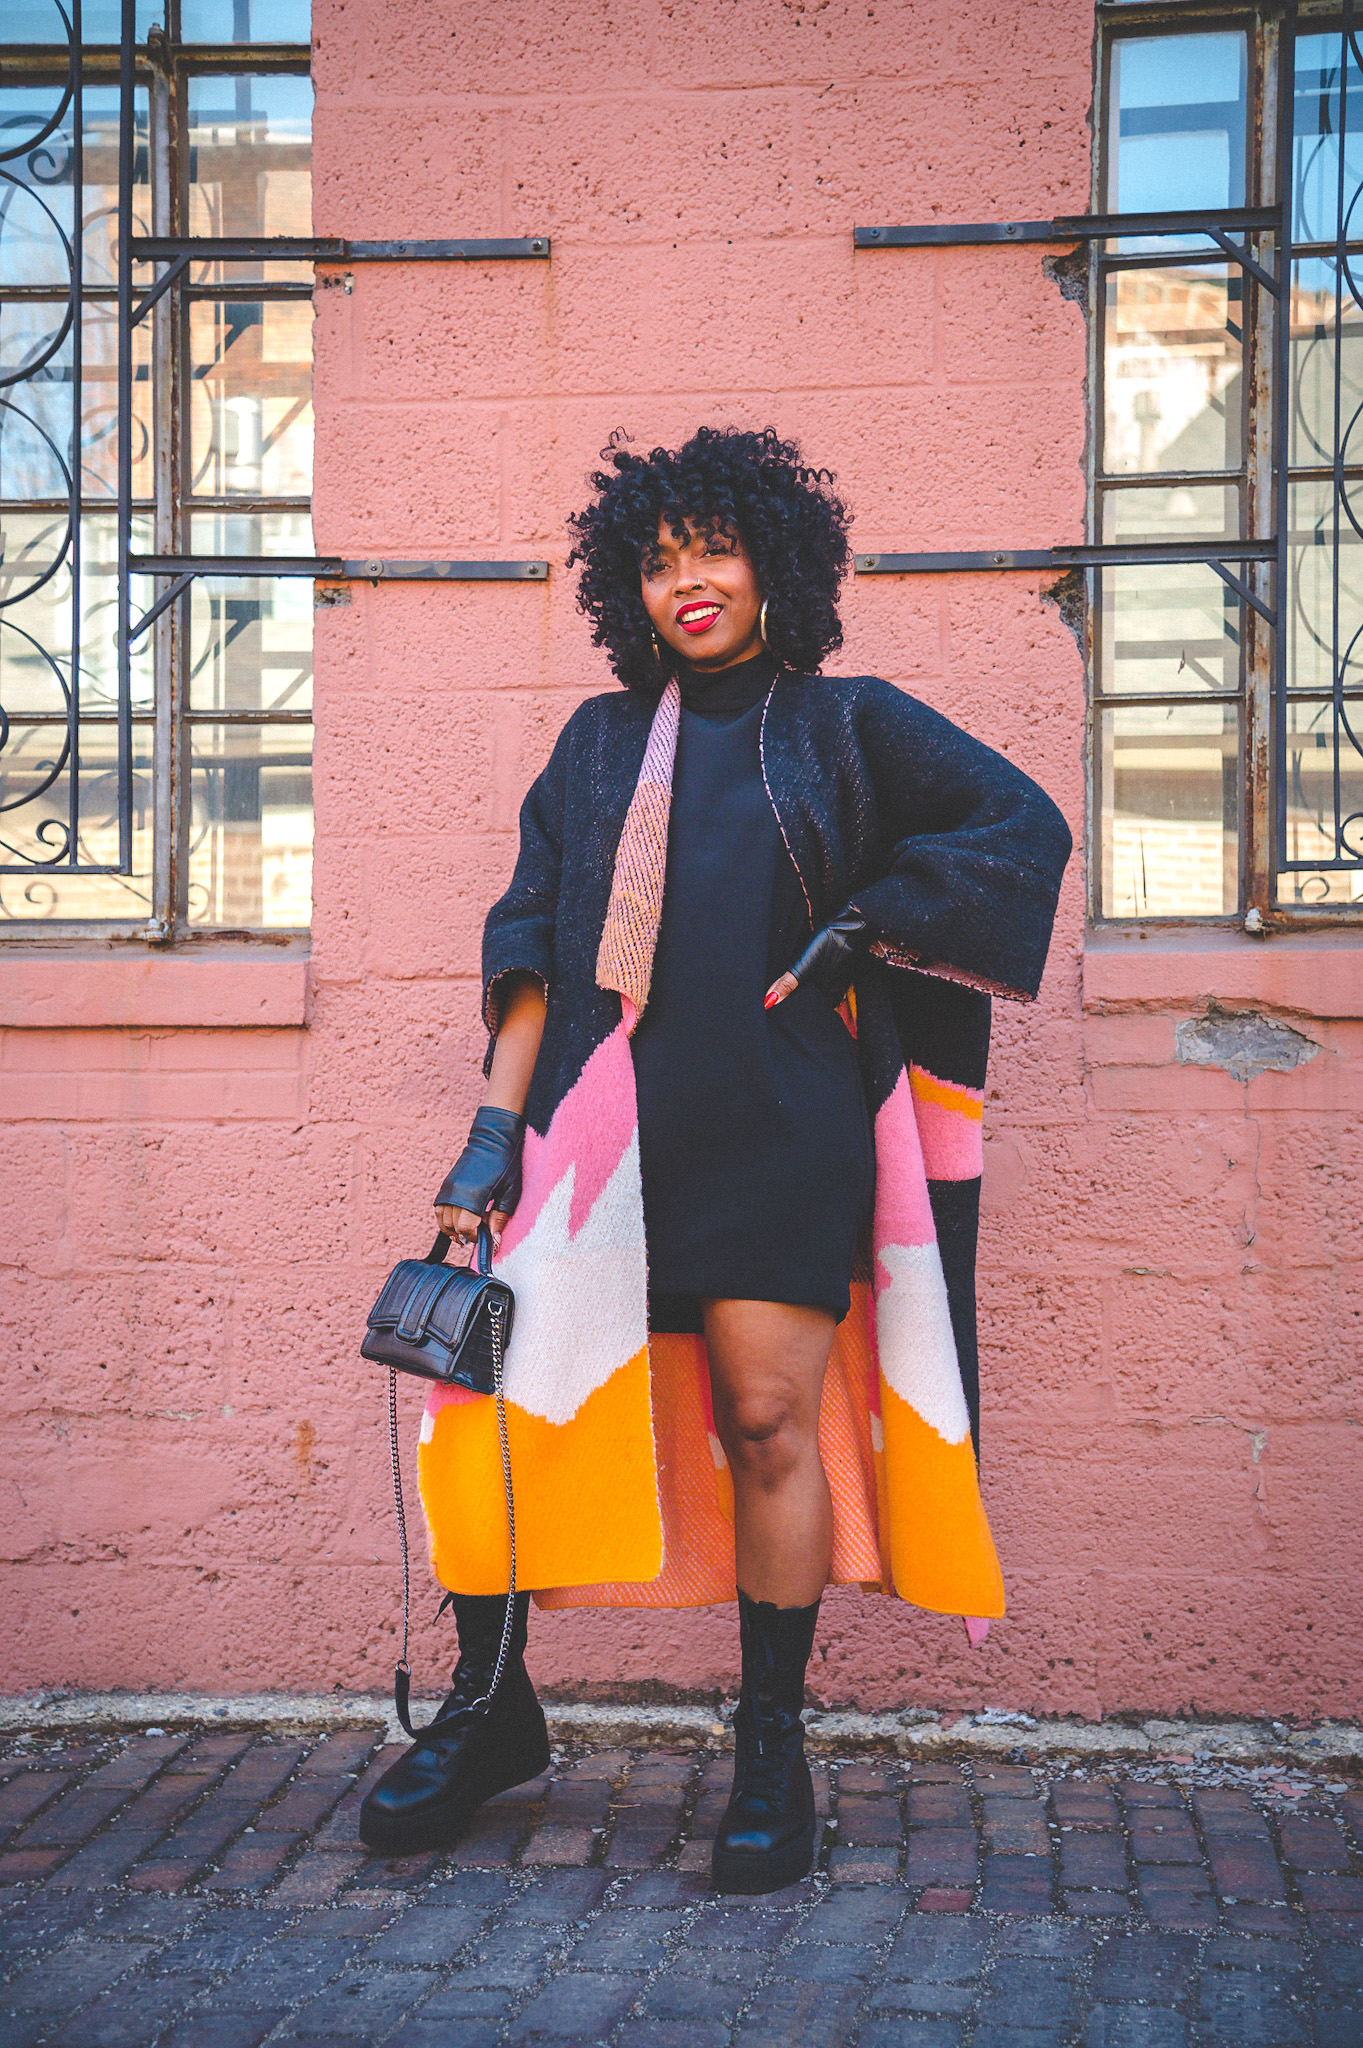 HOLIDAY OUTFIT IDEA, SWEENEE STYLE, HOW TO WEAR ALL BLACK, CARDIGANS FOR WINTER, WINTER OUTFIT IDEAS, INDIANAPOLIS FASHION BLOG, INDIANAPOLIS STYLE BLOG, CARDIGAN STYLE, HOW TO WEAR A CARDIGAN, BLACK GIRLS WHO BLOG